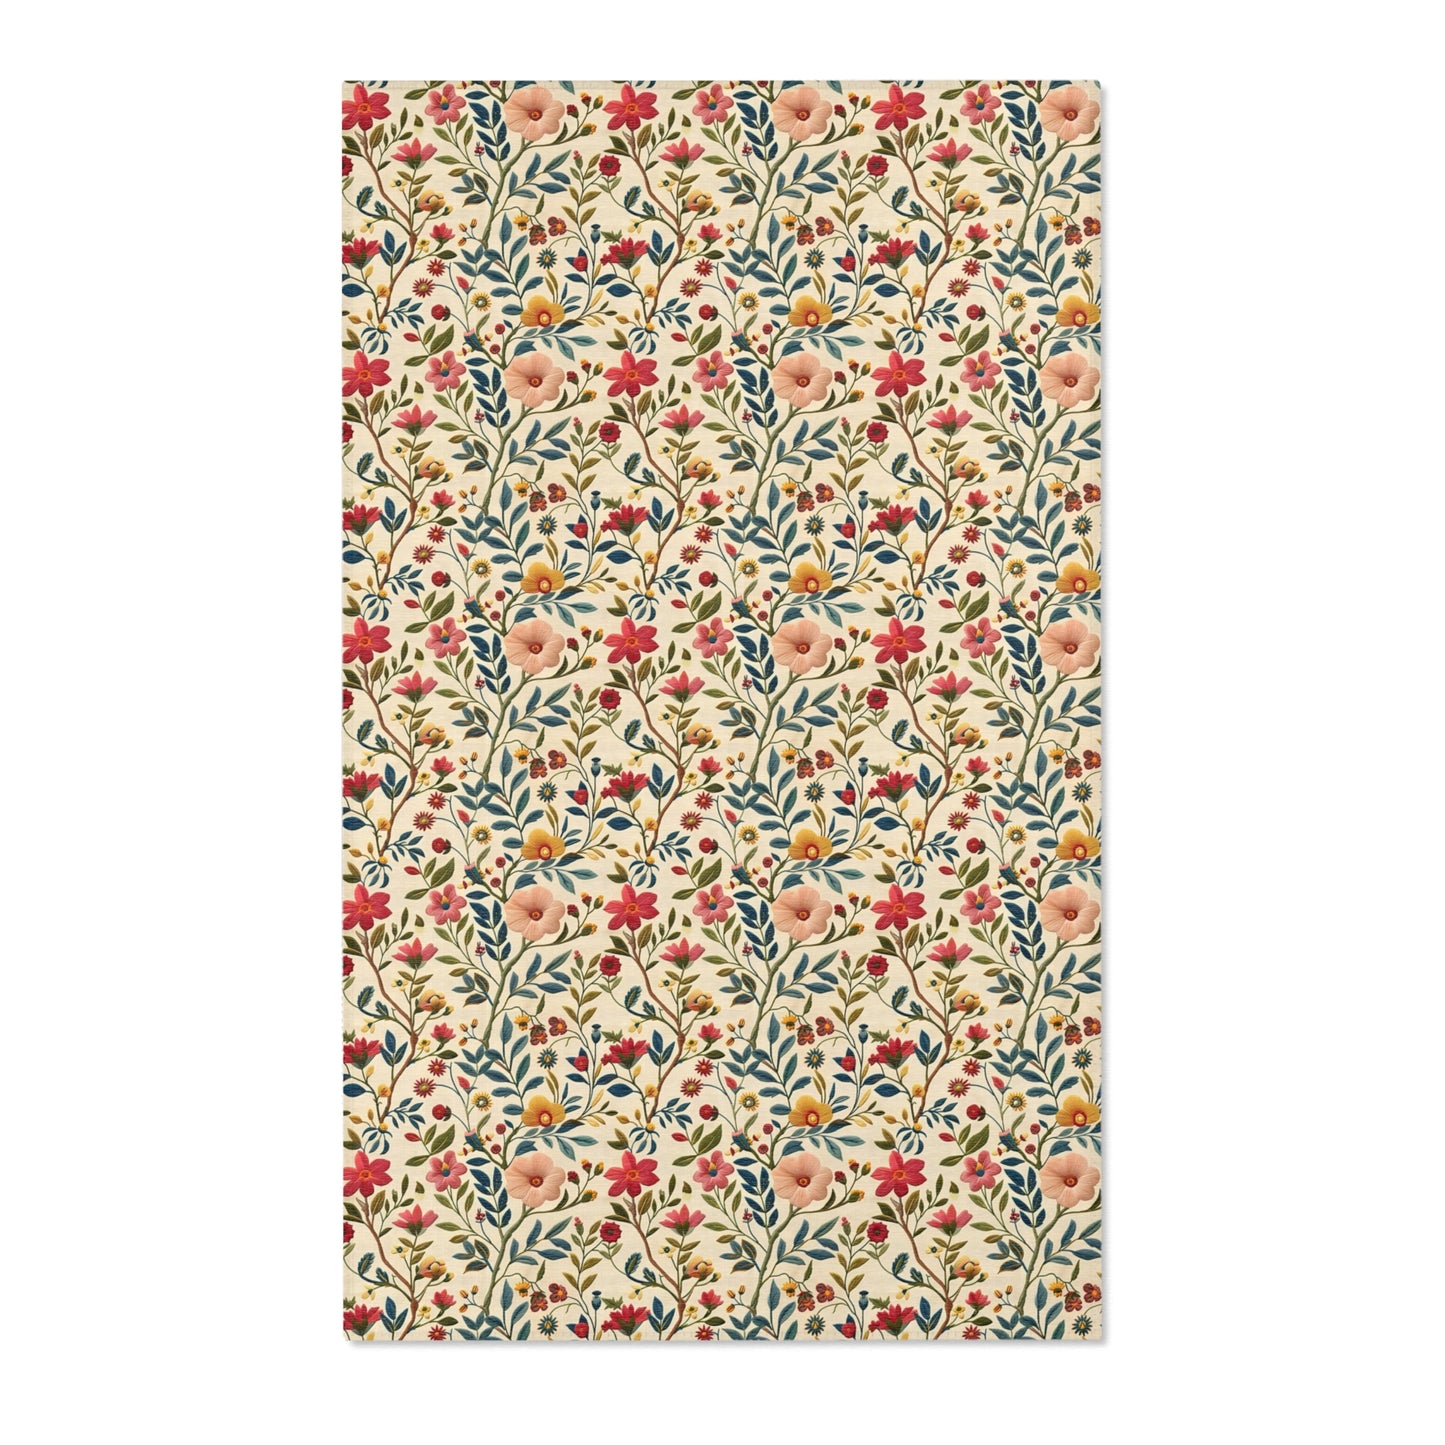 Floral Area Rug Carpet, Faux Embroidery Cottagecore Washable American Living Floor Indoor Outdoor 2x3 4x6 3x5 Kitchen Nursery Bedroom Mat